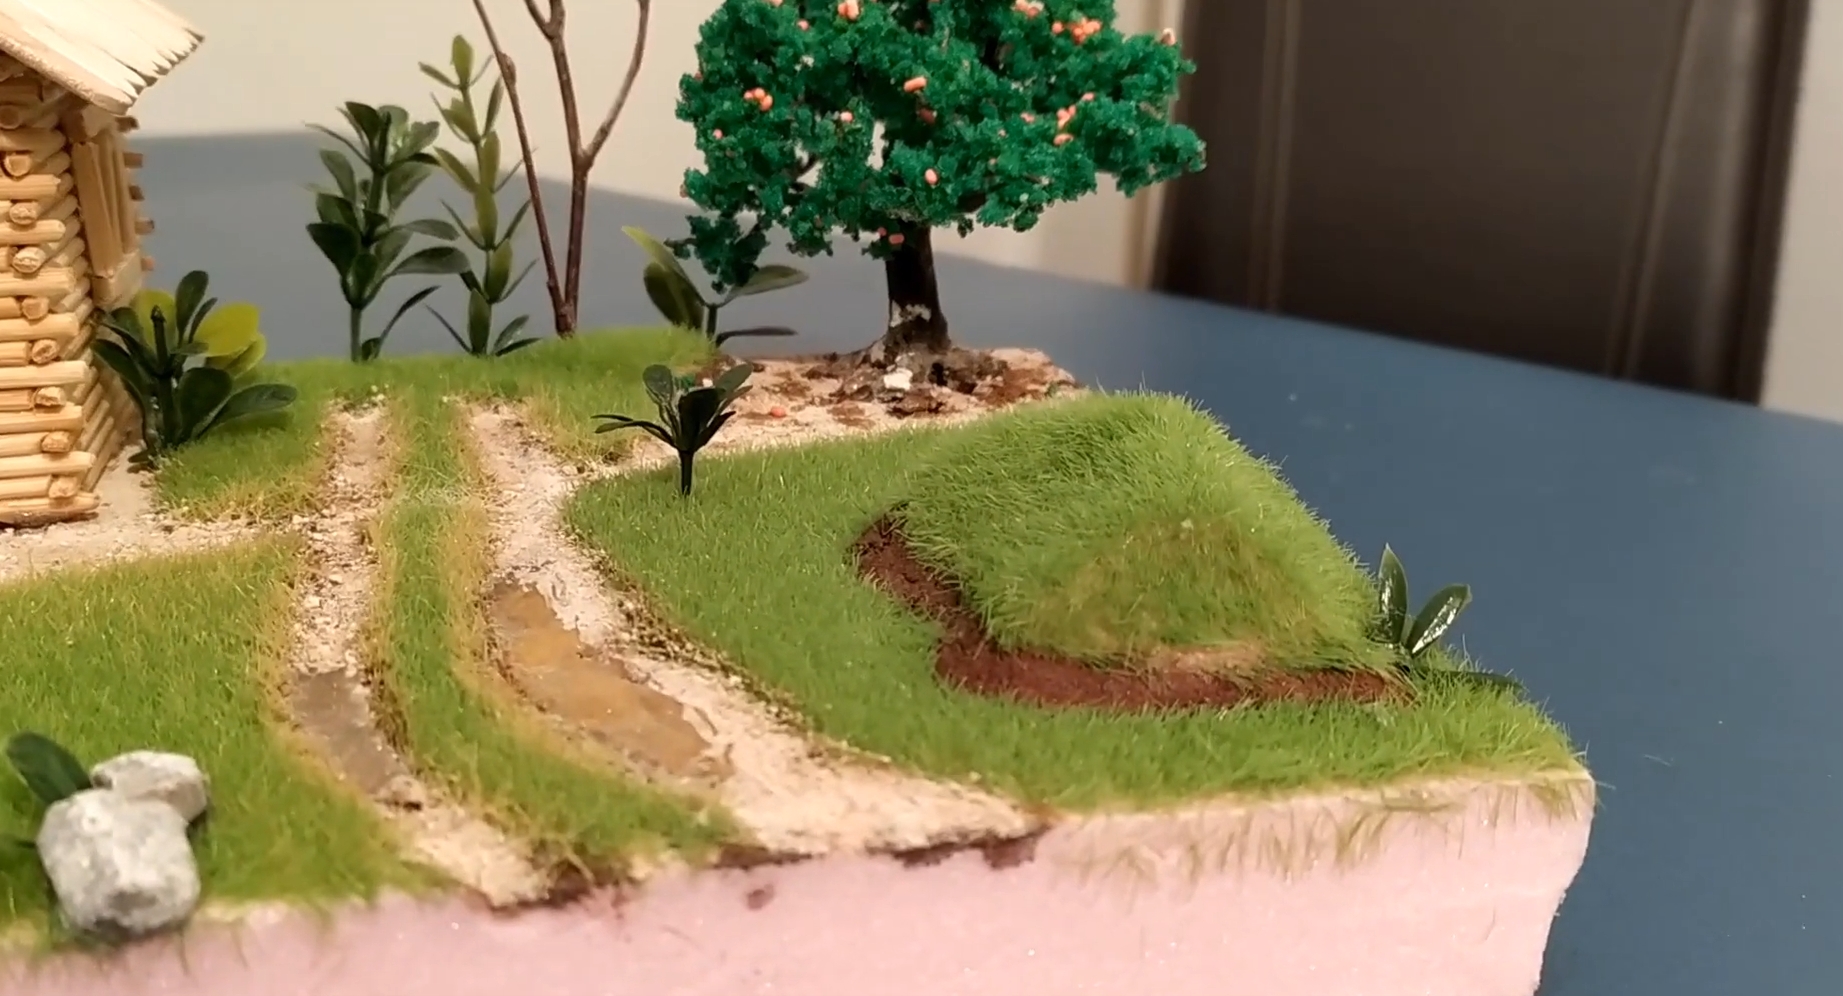 How to Make Grass For a Diorama? Guide: Useful Tips and FAQ